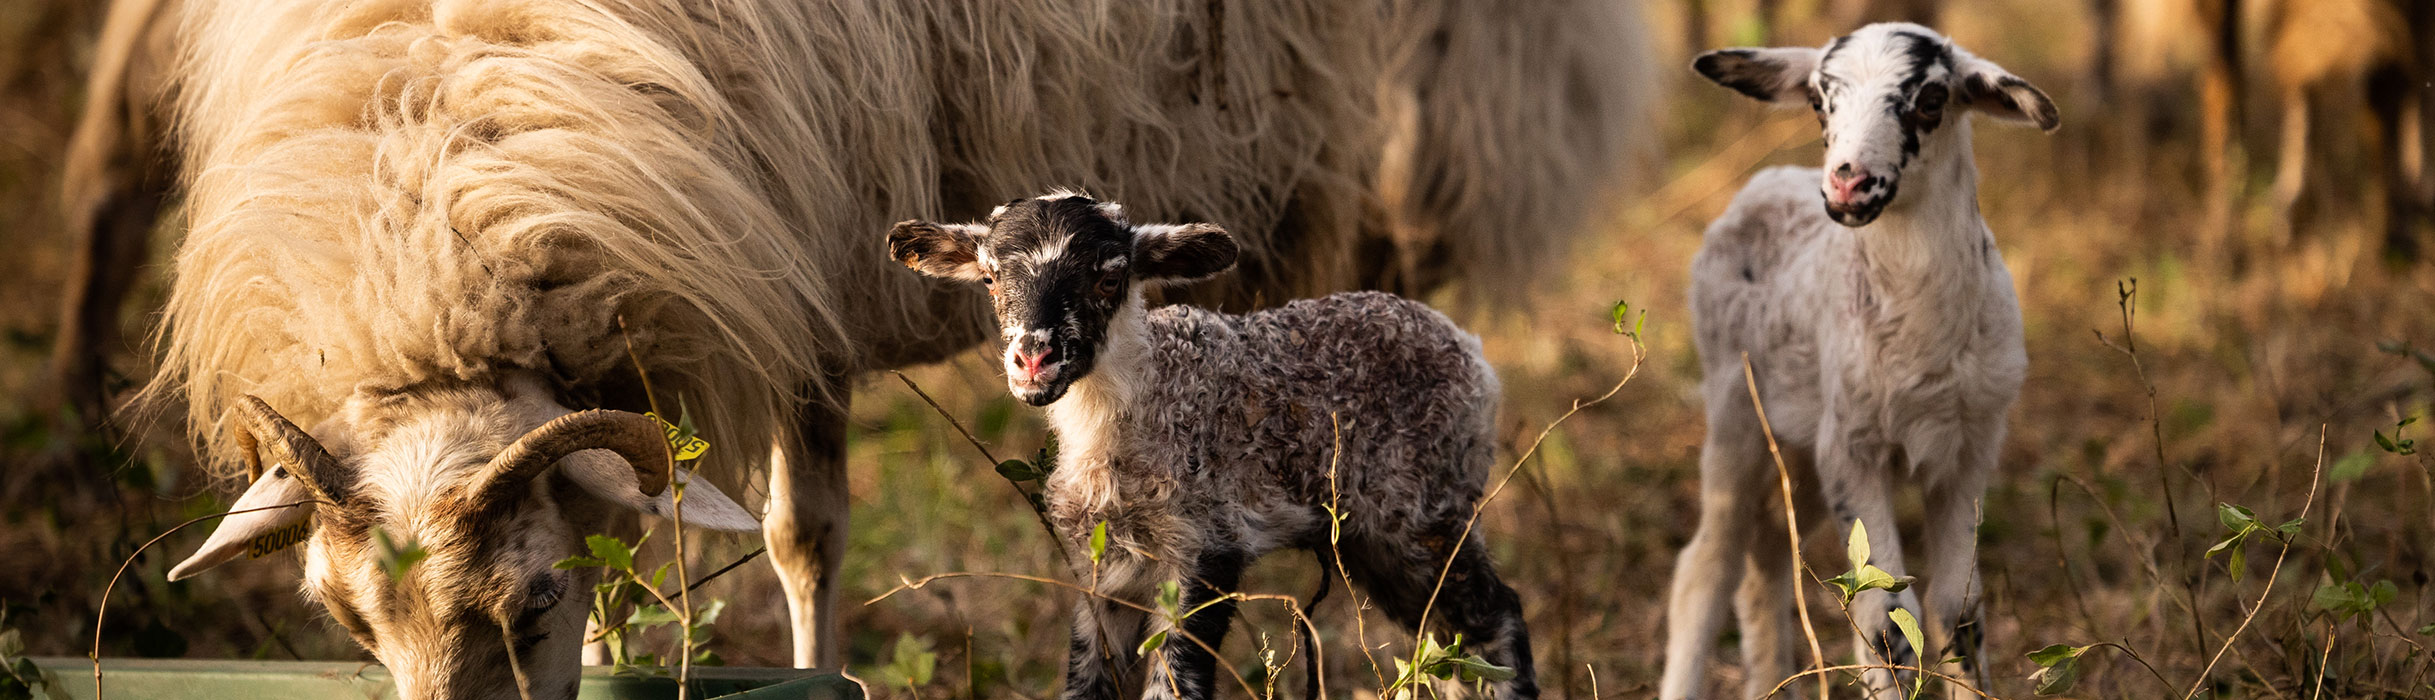 Many lambs are born at Giscours every year